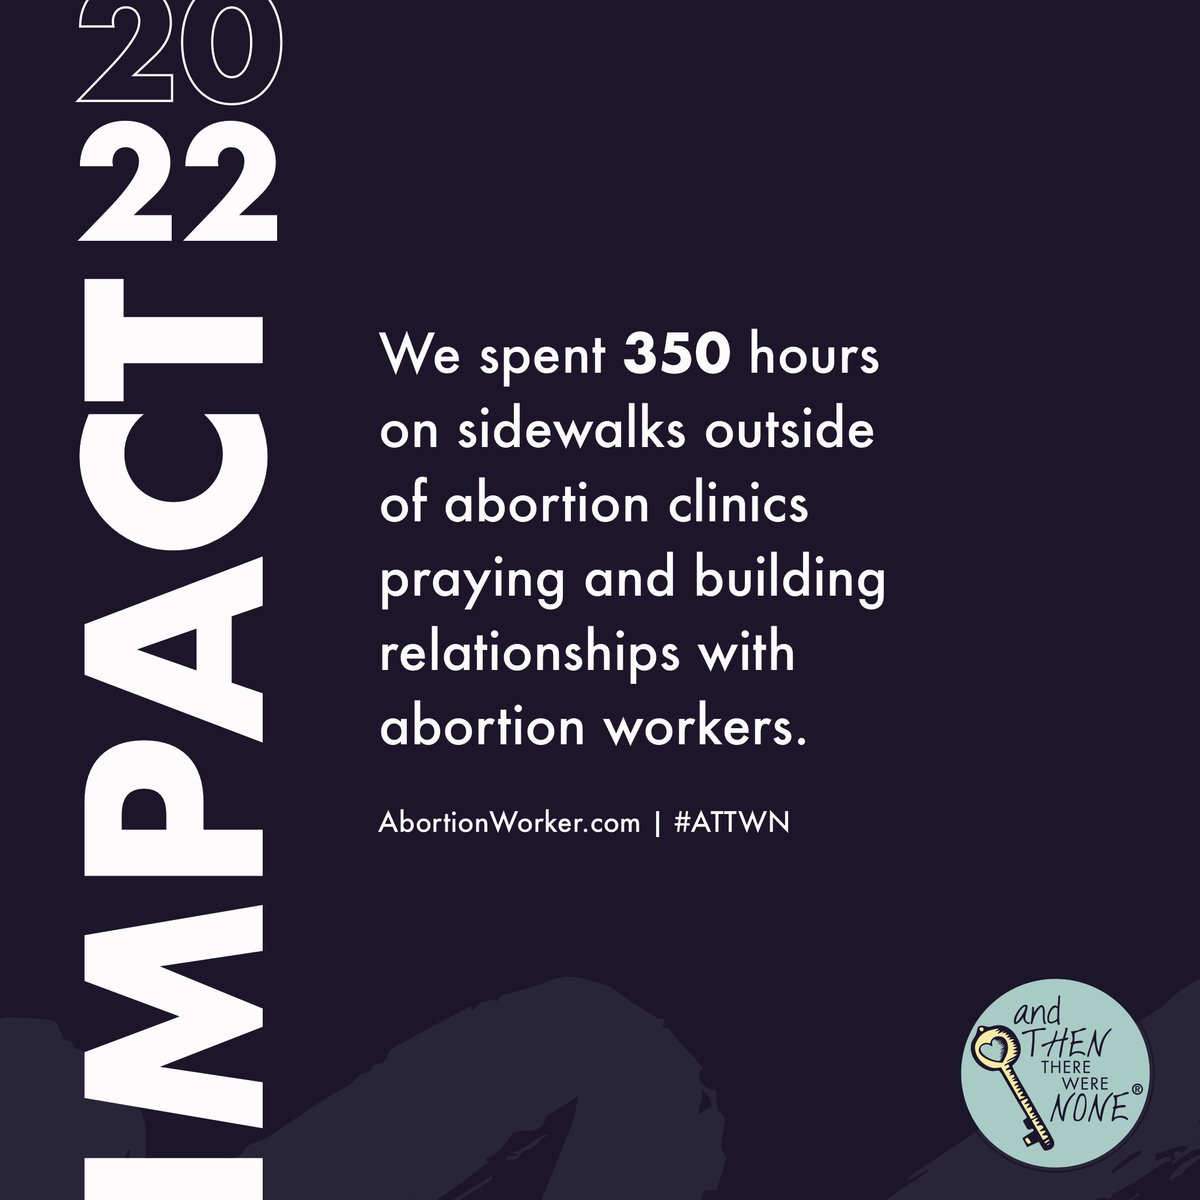 Sometimes we just have to meet them where they’re at! Together with Sidewalk Advocates for Life, our staff is equipped to make meaningful connections on sidewalks with current abortion industry workers. 

#sidewalkadvocacy #abortionworker #untiltherearenone